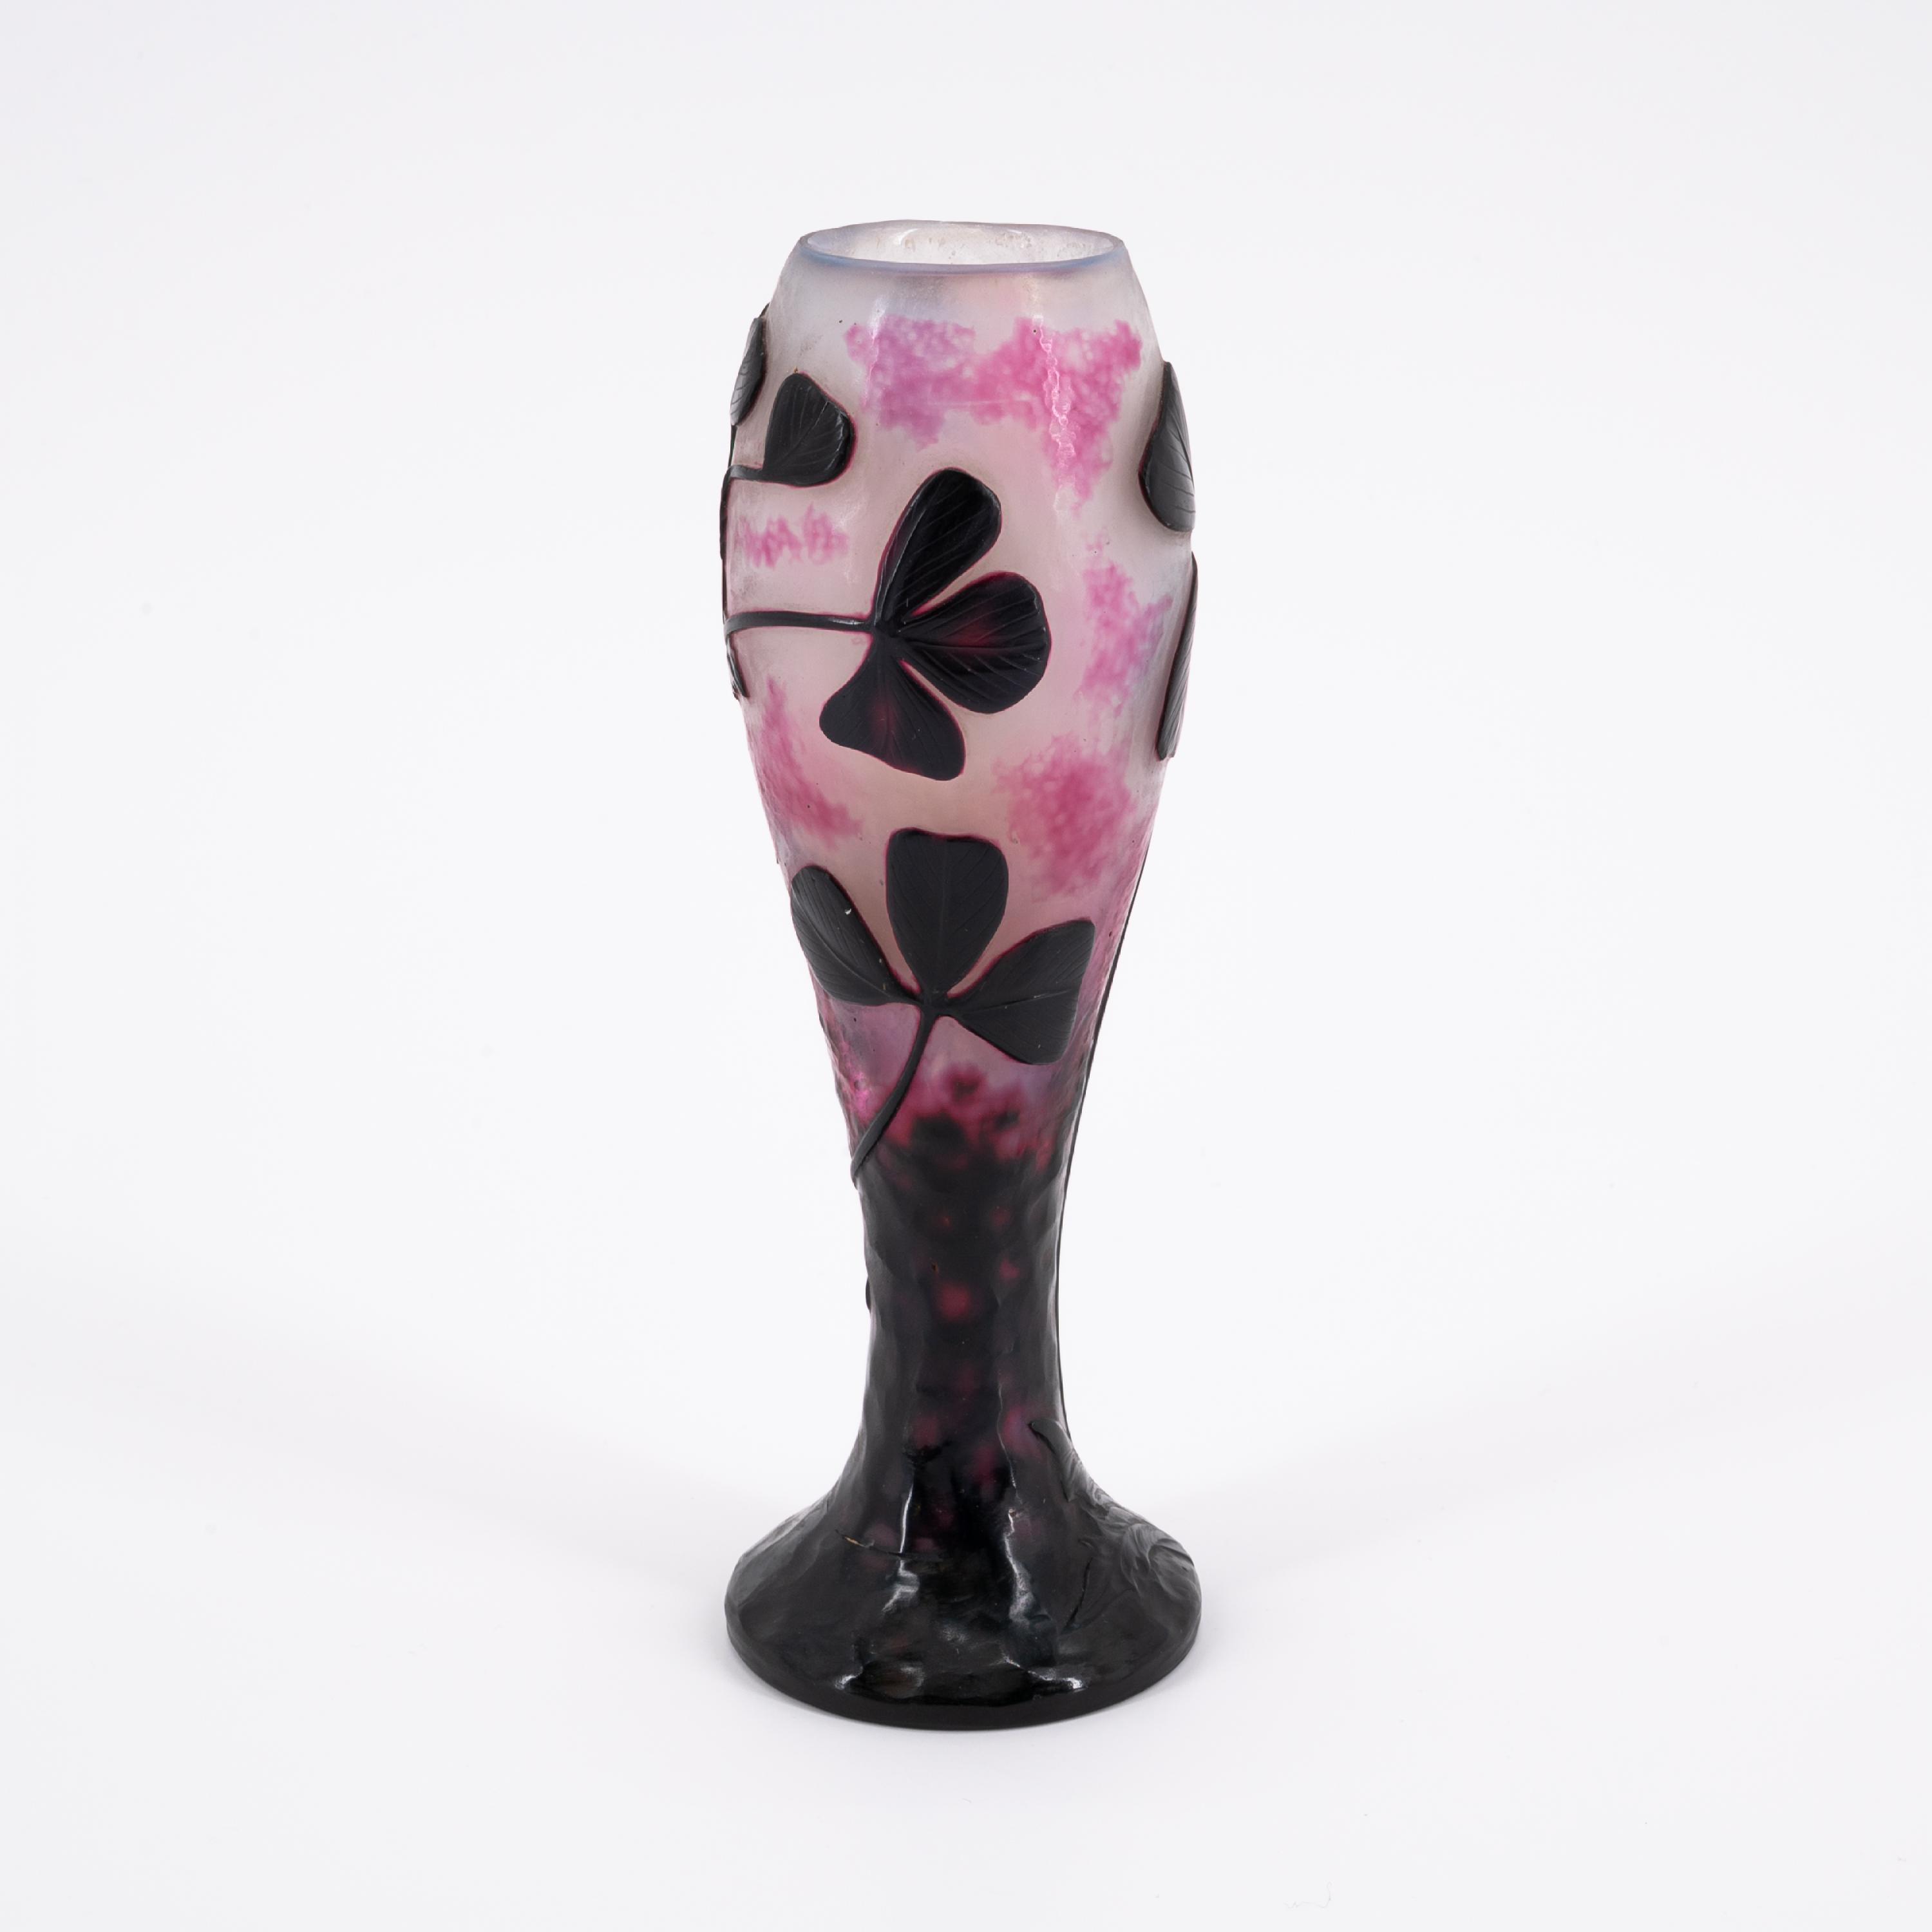 CLUB-SHAPED GLASS VASE WITH GINKO BRANCHES - Image 3 of 6